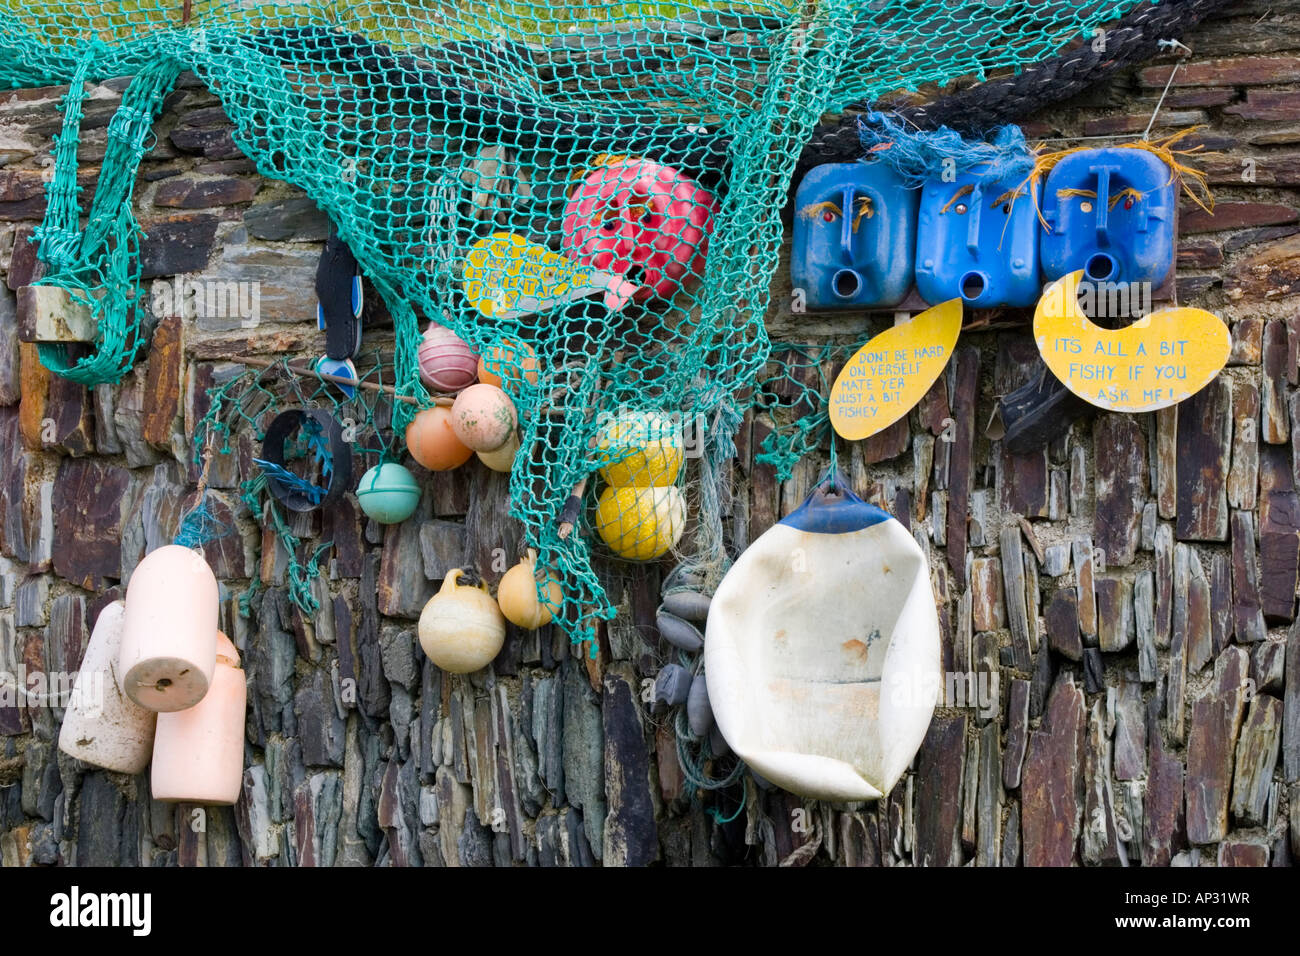 https://c8.alamy.com/comp/AP31WR/beach-art-made-from-old-fishing-nets-fishing-buoys-and-plastic-containers-AP31WR.jpg